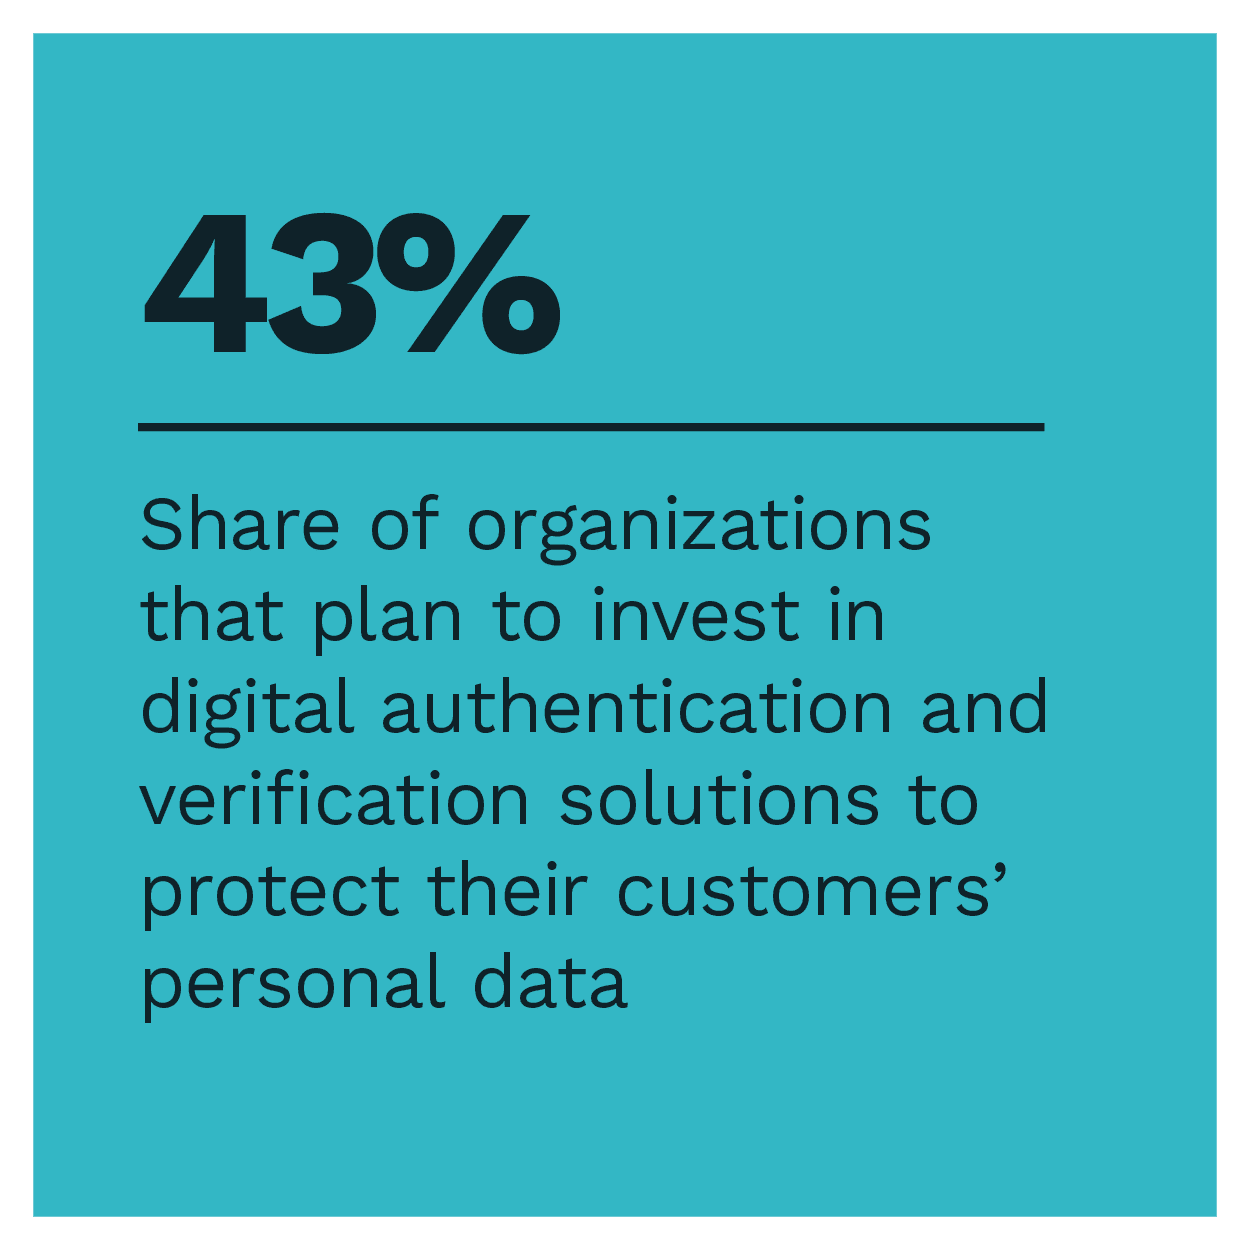 Share of organizations that plan to invest in digital authentication and verification solutions to protect their customers' data